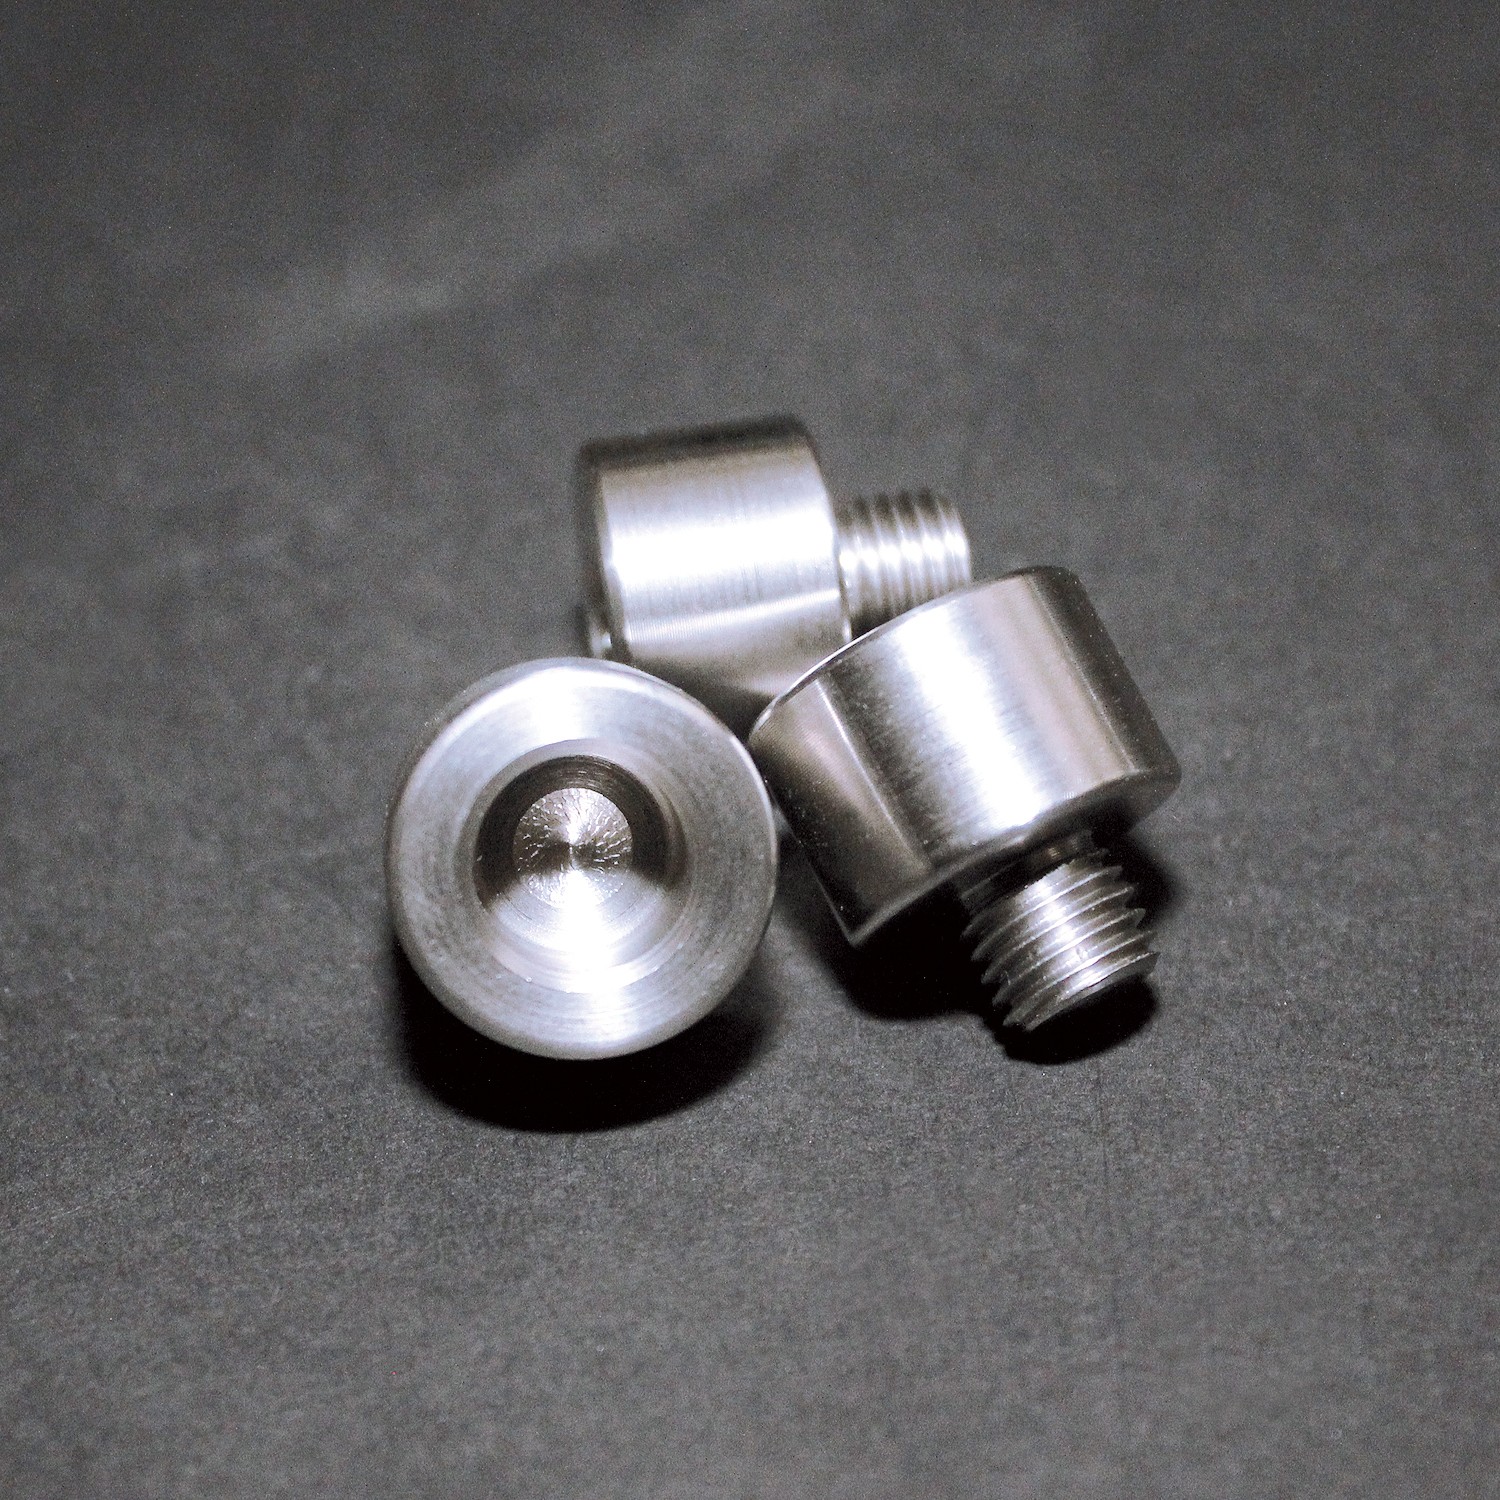 BANK BUG V1 STAINLESS STEEL LOCKING POINTS